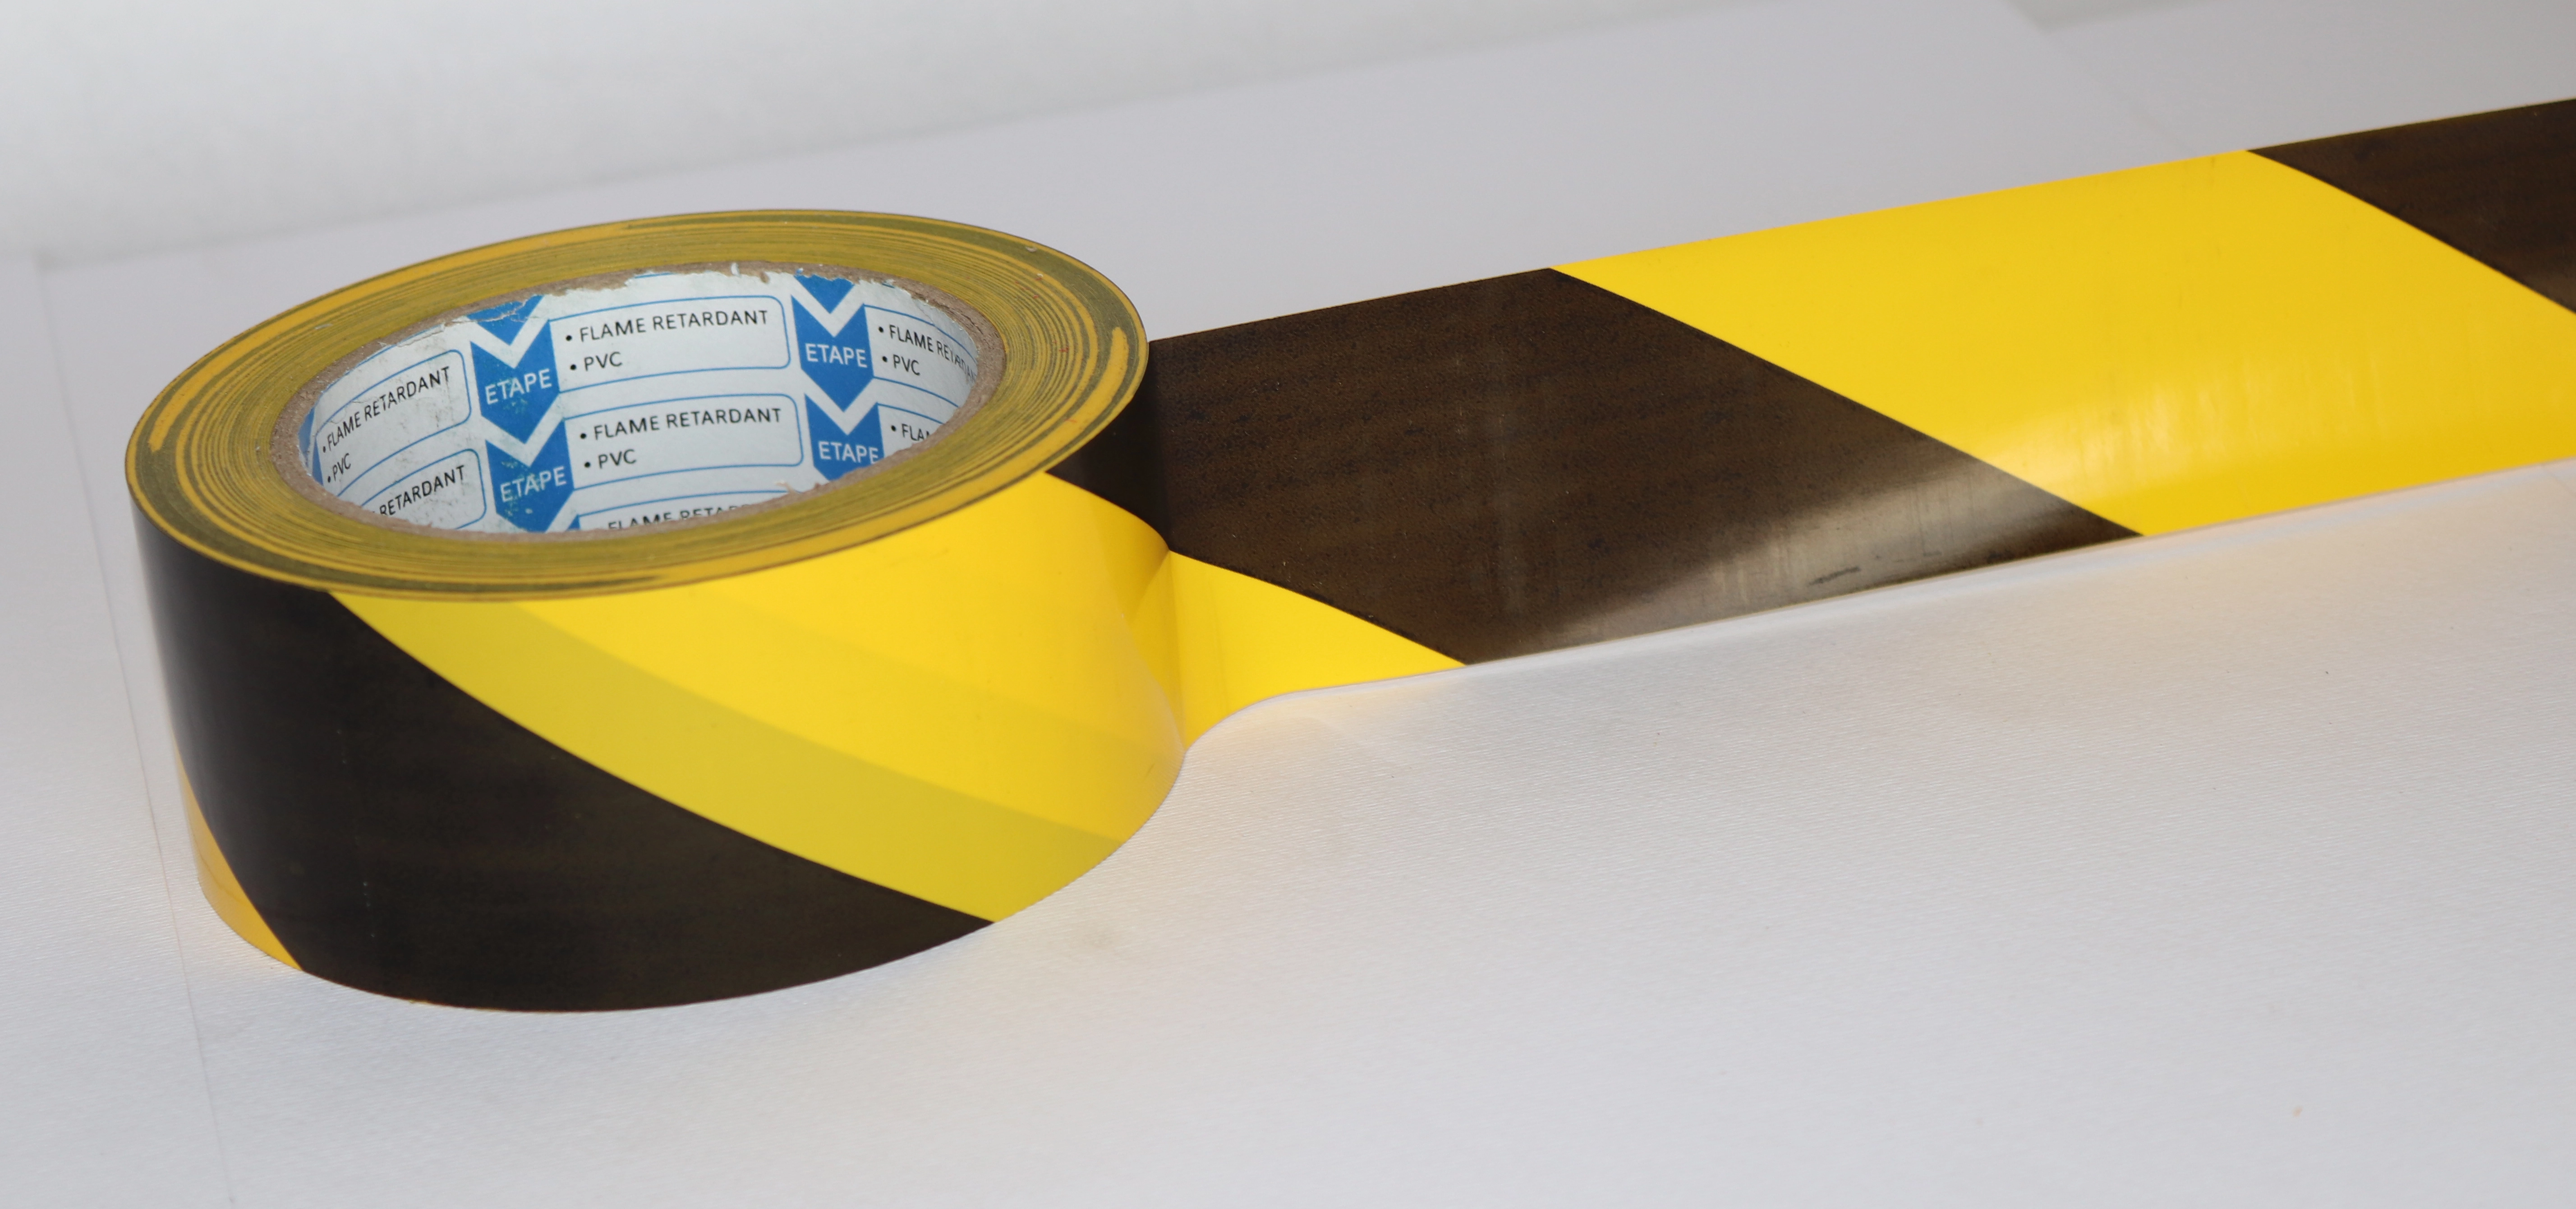 Floor marking tape used for safety reasons sold by Easitape